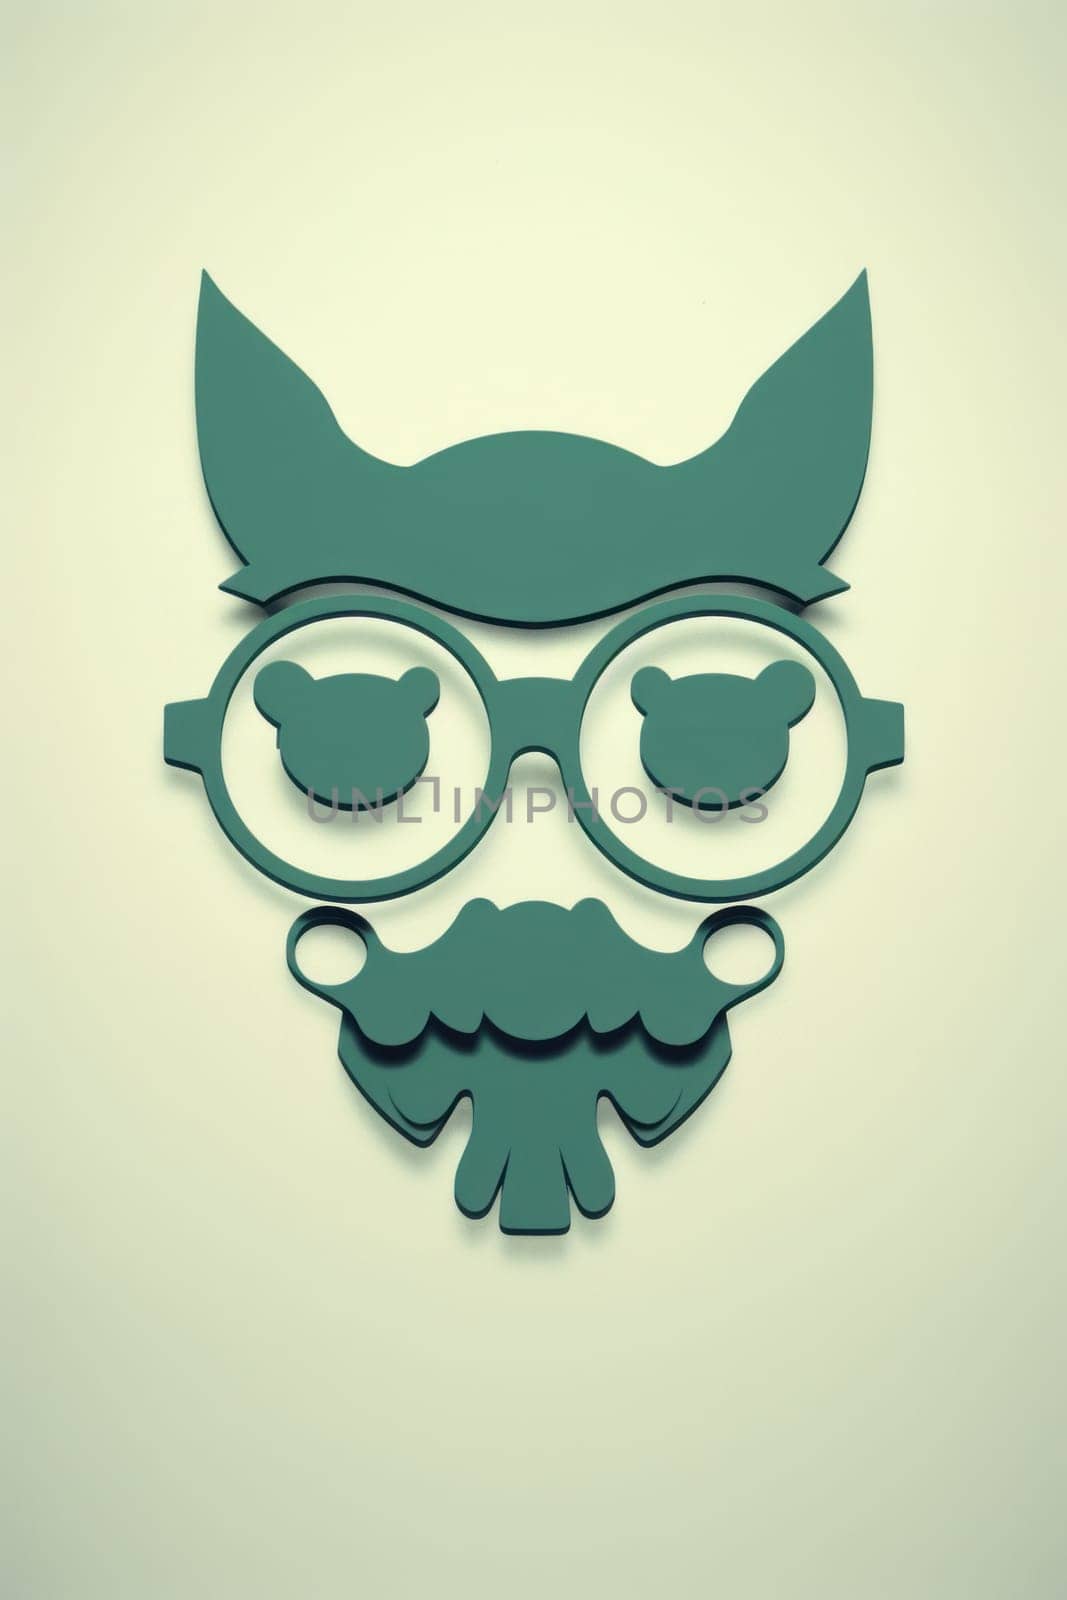 A paper cut of a cat with glasses and a mustache, AI by starush